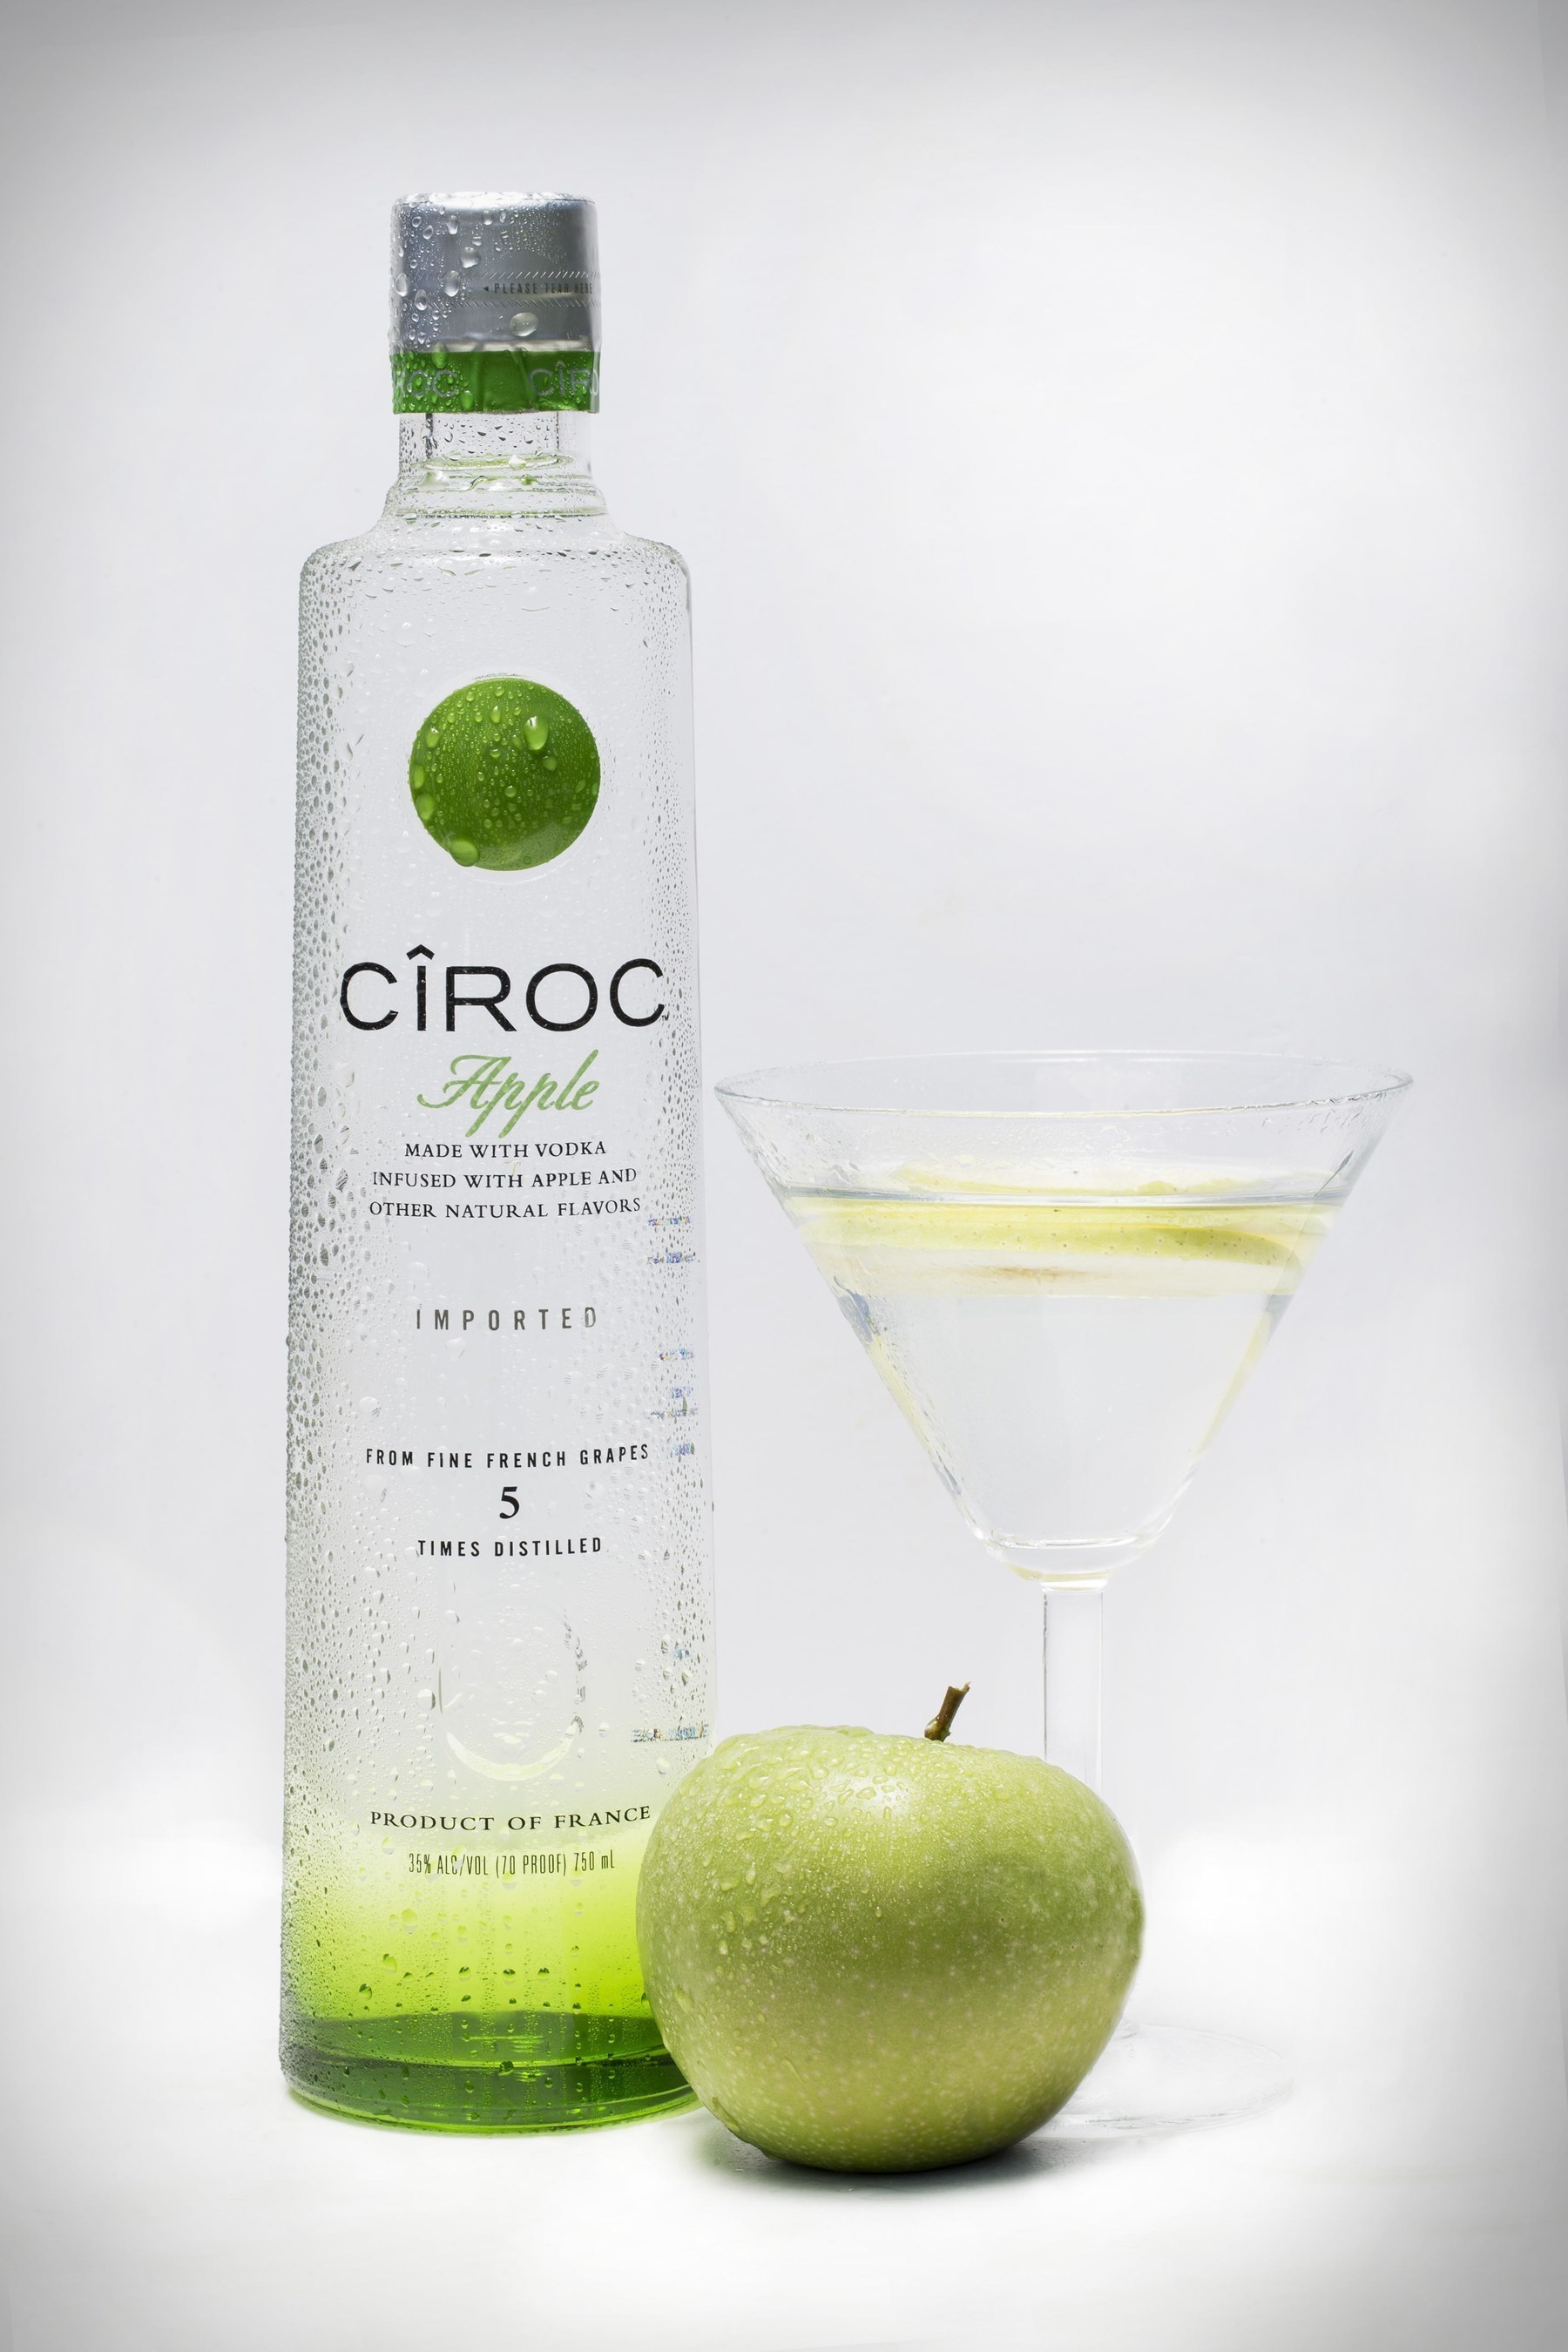 The liquid also lends itself well to a variety of twists on more traditional cocktails including the CIROC Apple.